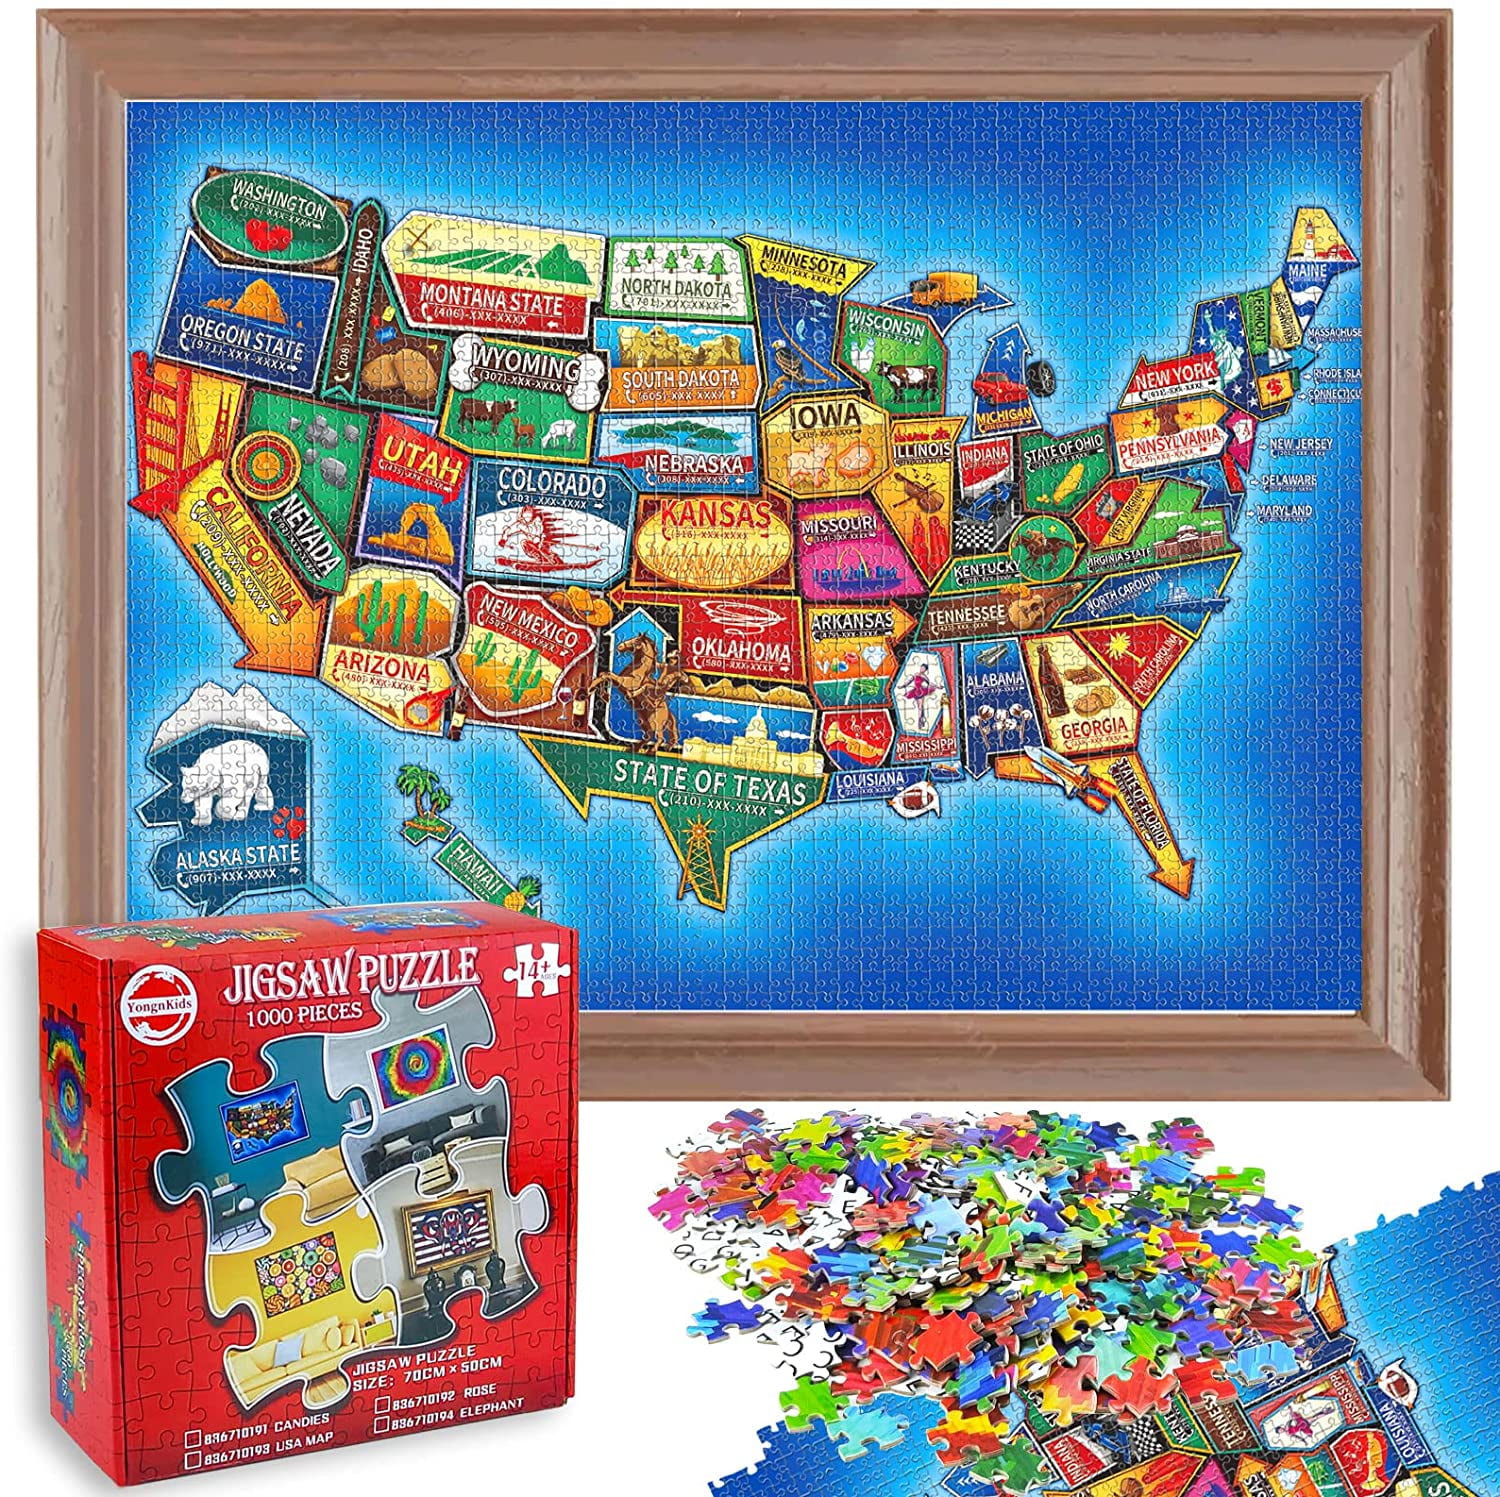 4000 Piece Jigsaw Puzzles Multi for Adults Families and Kids Age 14 and up Small Black dog-4000Pieces